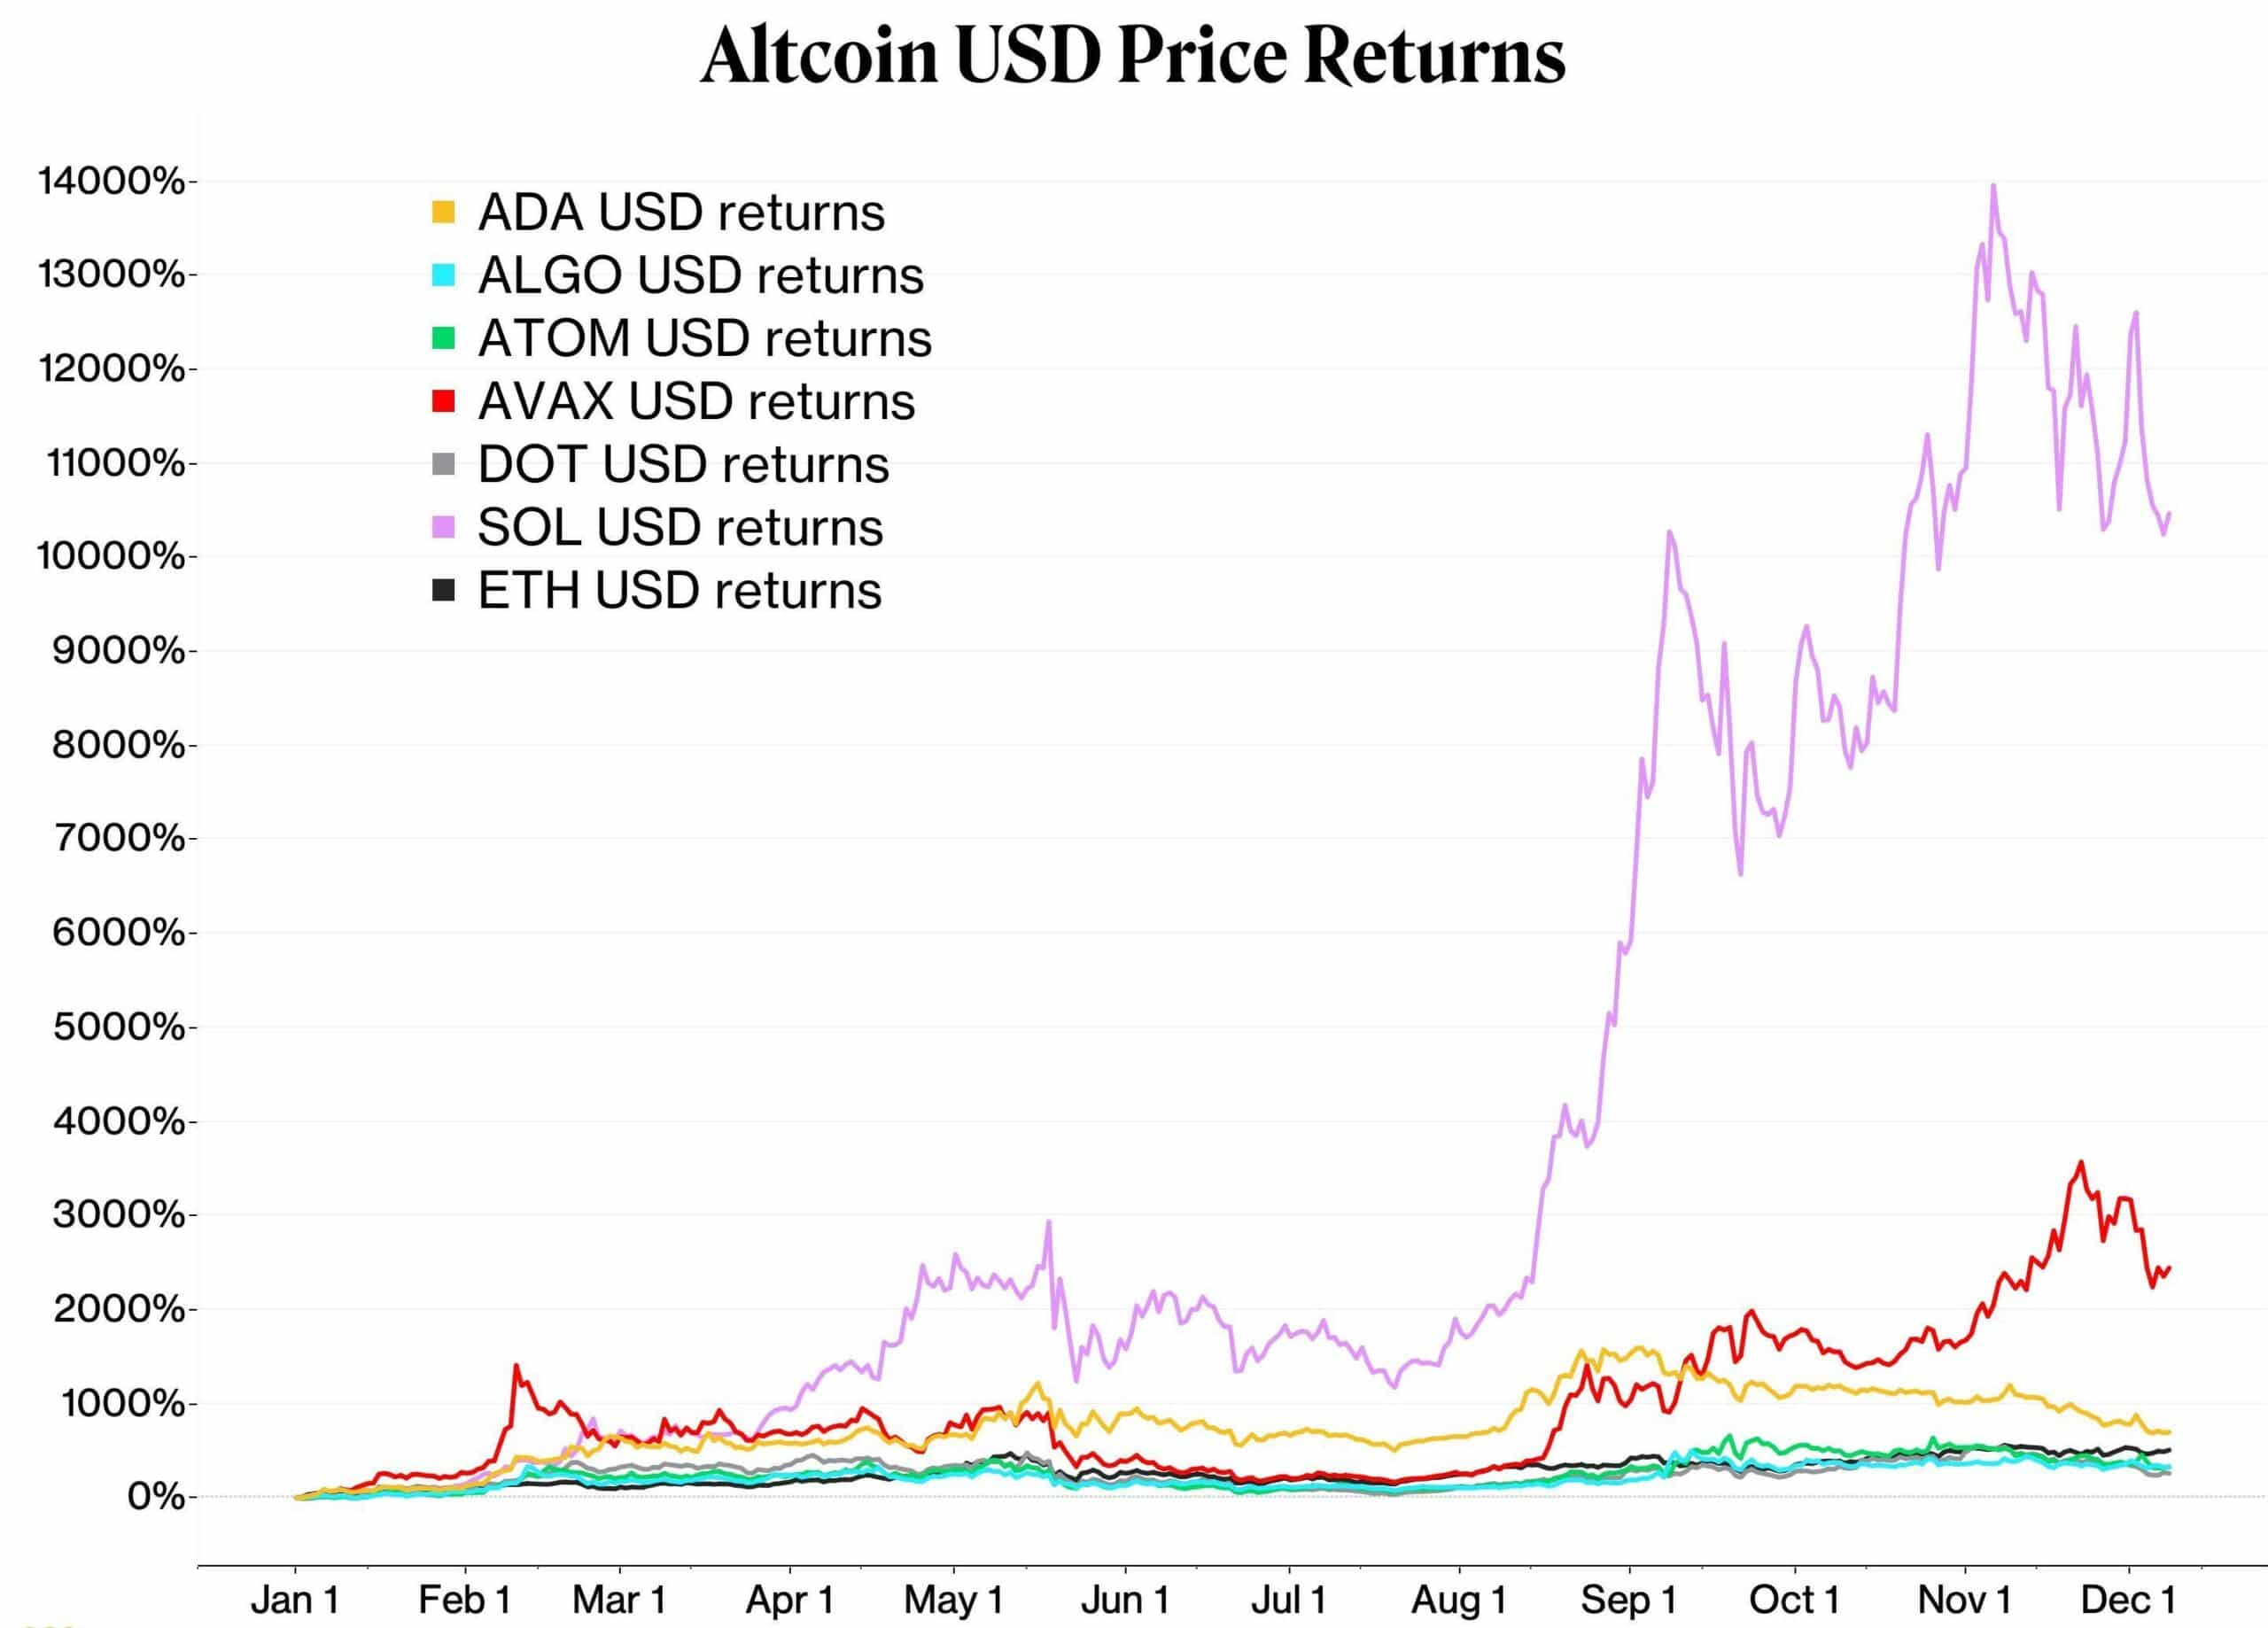 Altcoin year-to-date returns in U.S. dollars